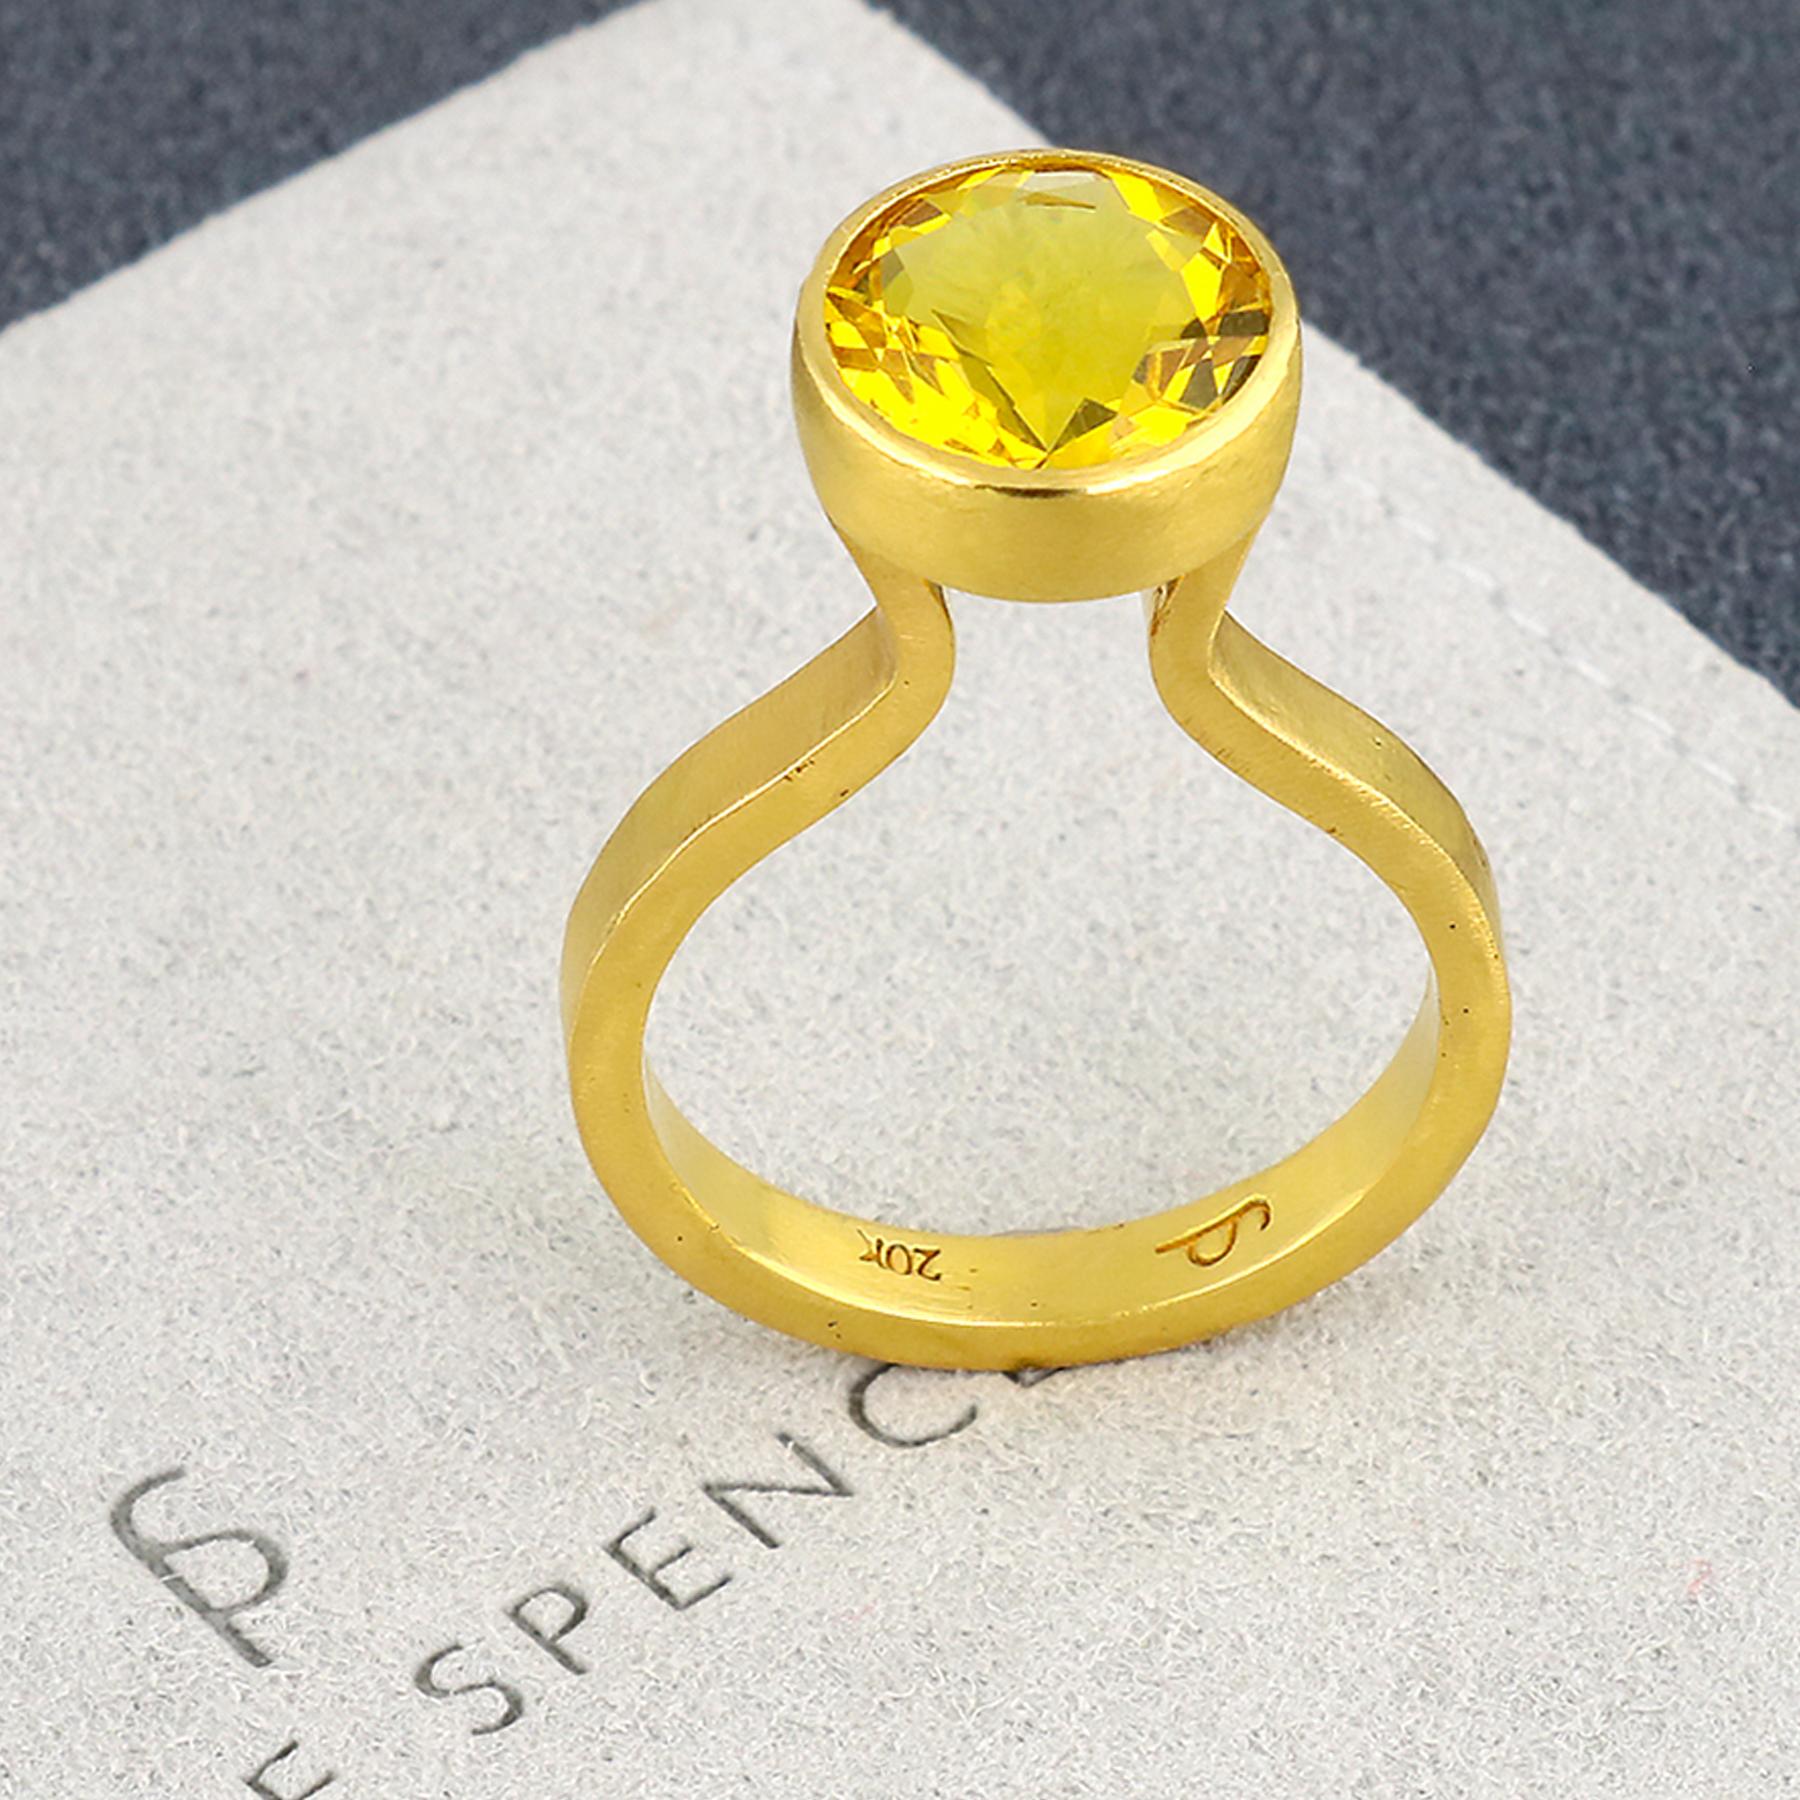 PHILIPPE SPENCER - 3.25 Ct. Round Lemon-Color Citrine wrapped in High-Set backless 22K Gold, with Extra Heavy 20K Gold Completely Hand-Forged Statement Ring. Size 8, and is in-stock and ready to ship. Our apologies in advance, this One-Of-A-Kind